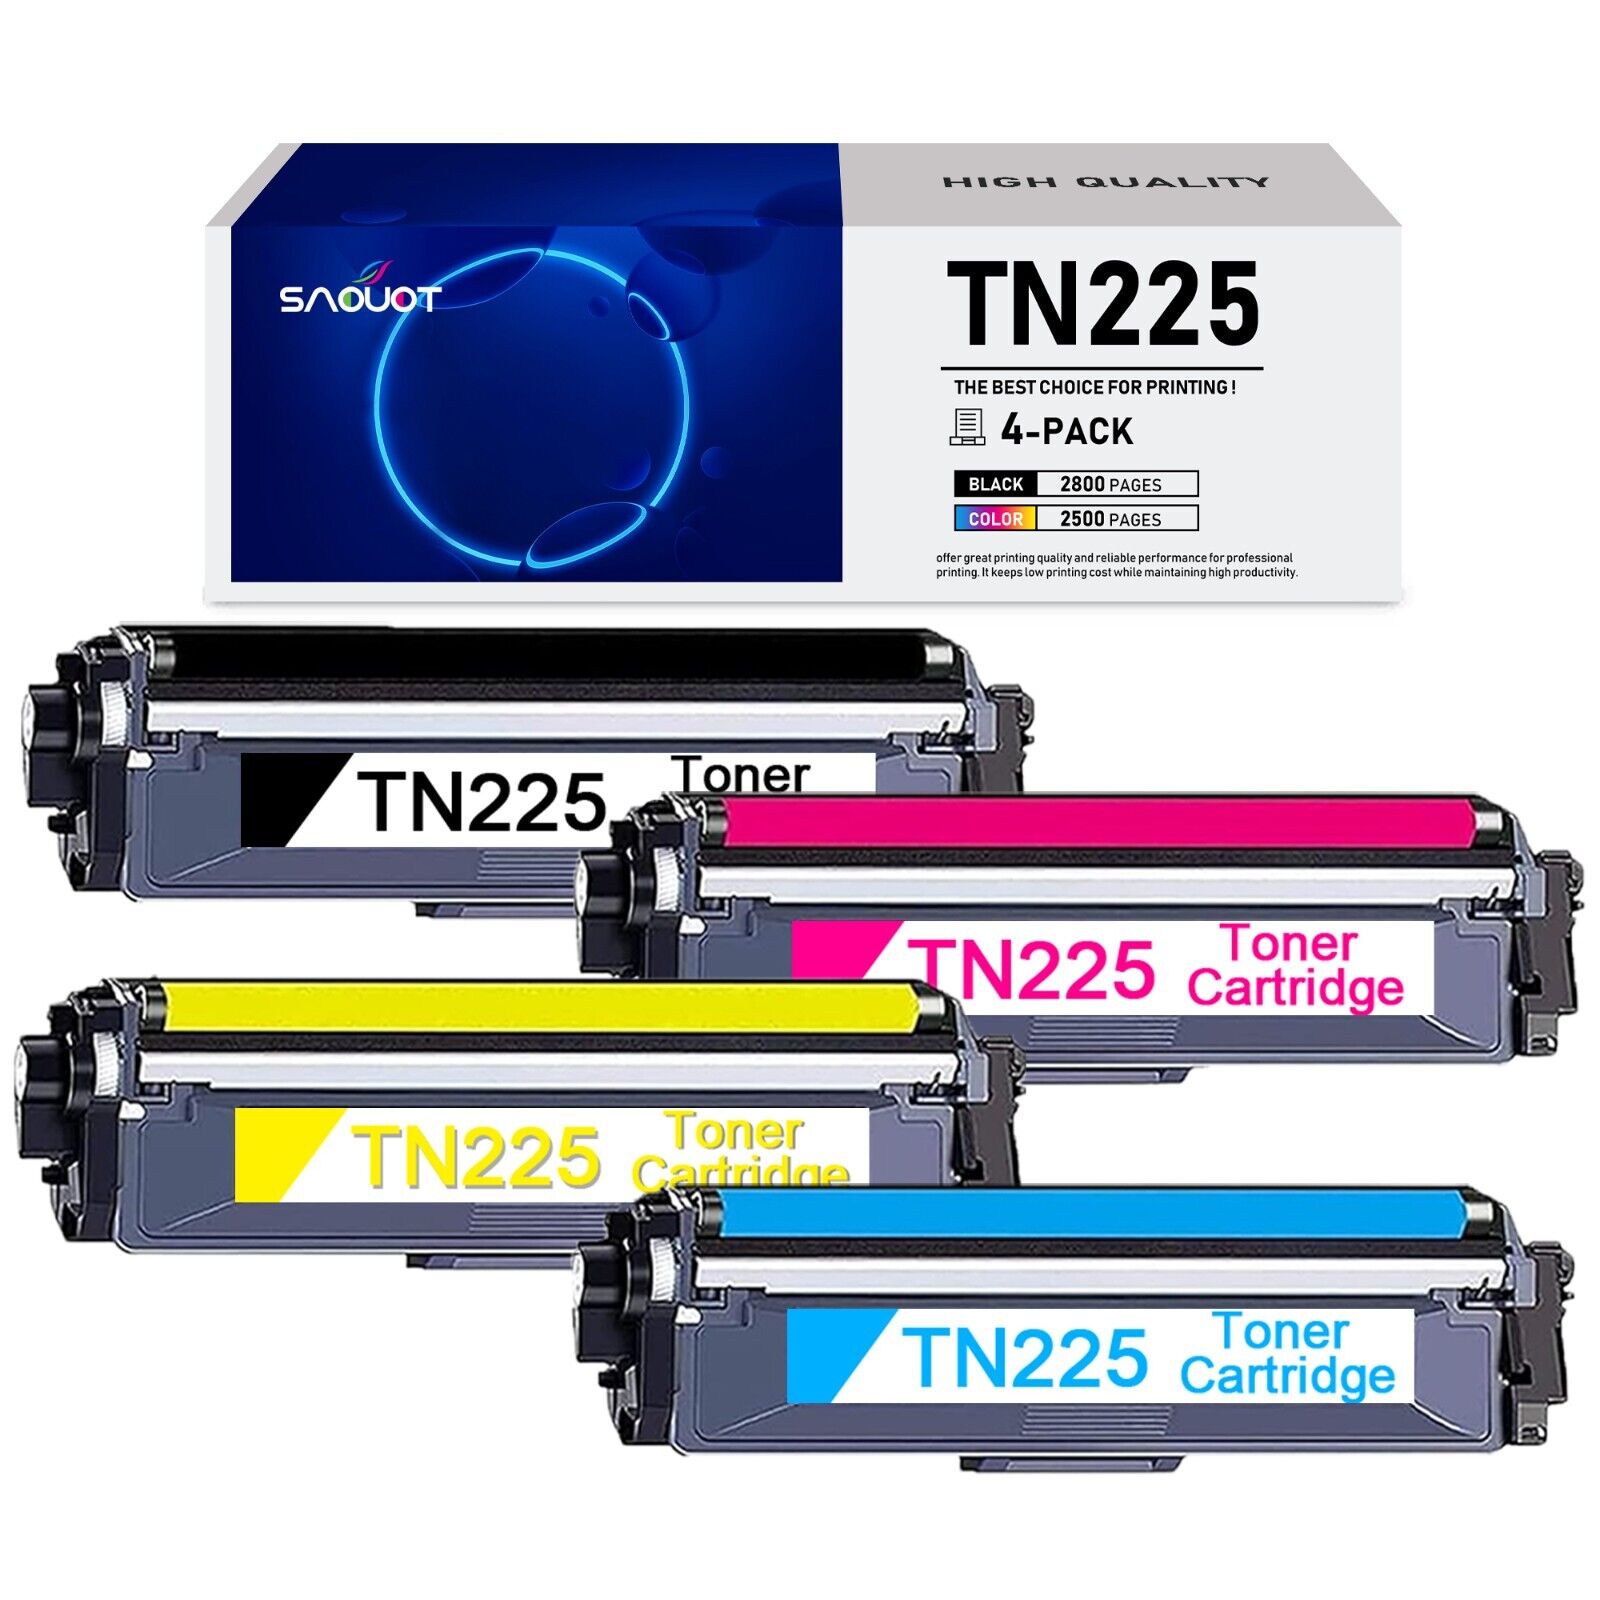 TN225 Toner Cartridge Replacement for Brother HL-3170CDW 3180CDW MFC-9130CW